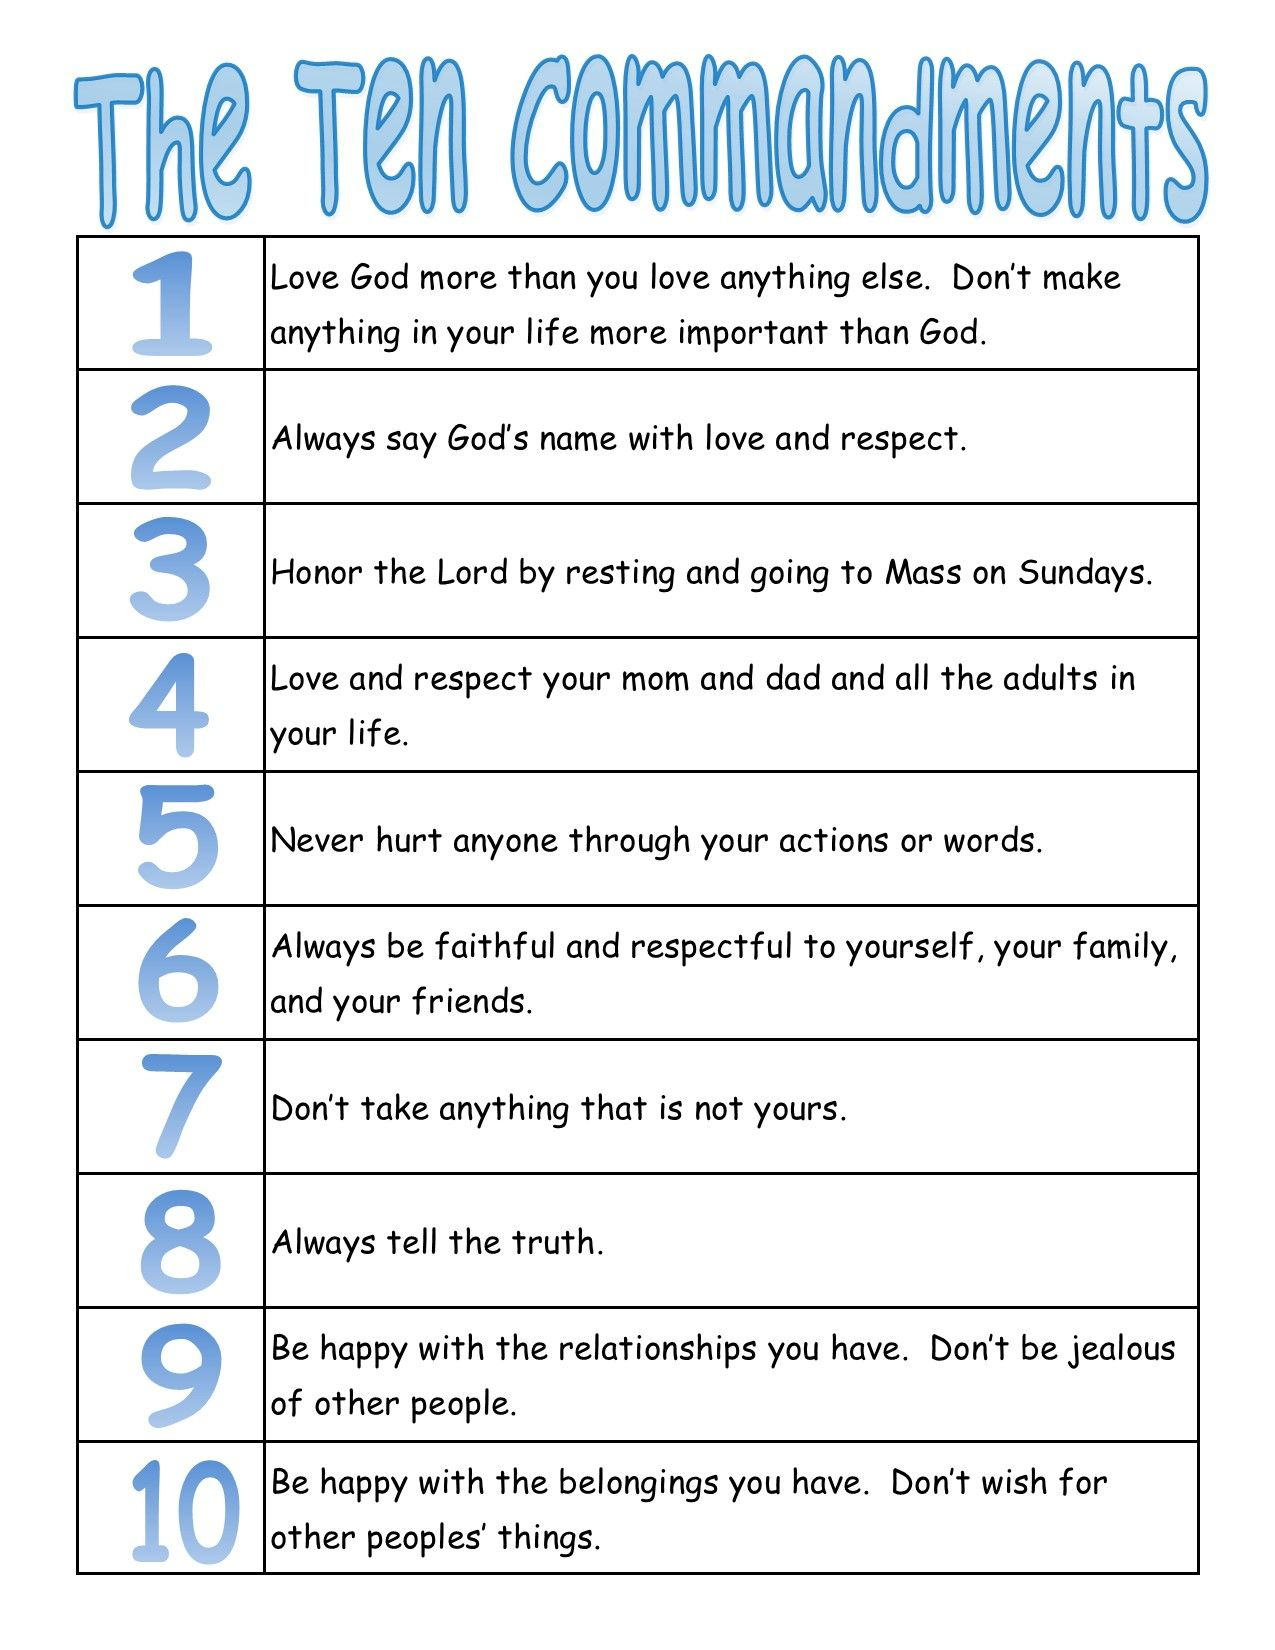 A True Catholic Version Of The Ten Commandments, For Kids | The Bible - Free Printable Catholic Mass Book